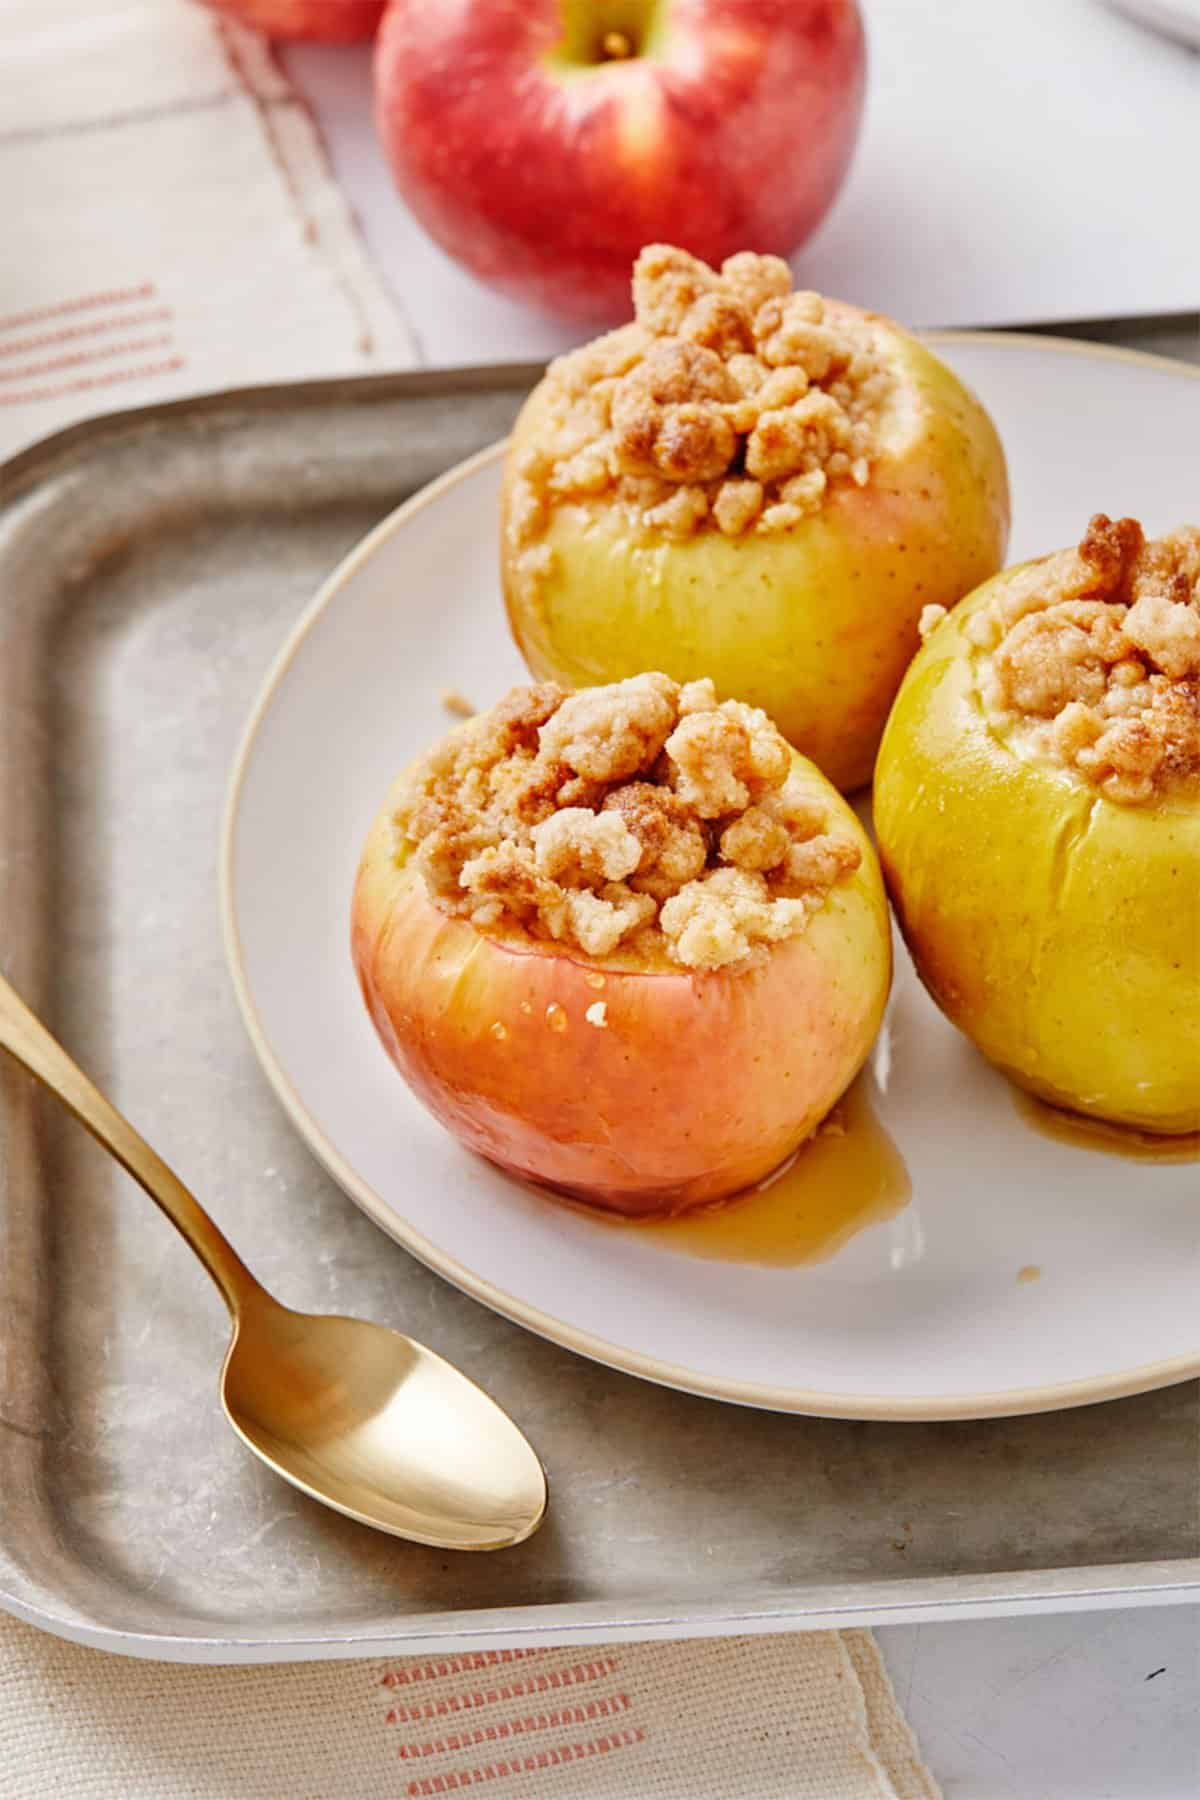 Baked apples with crumb topping on a plate ready to eat.